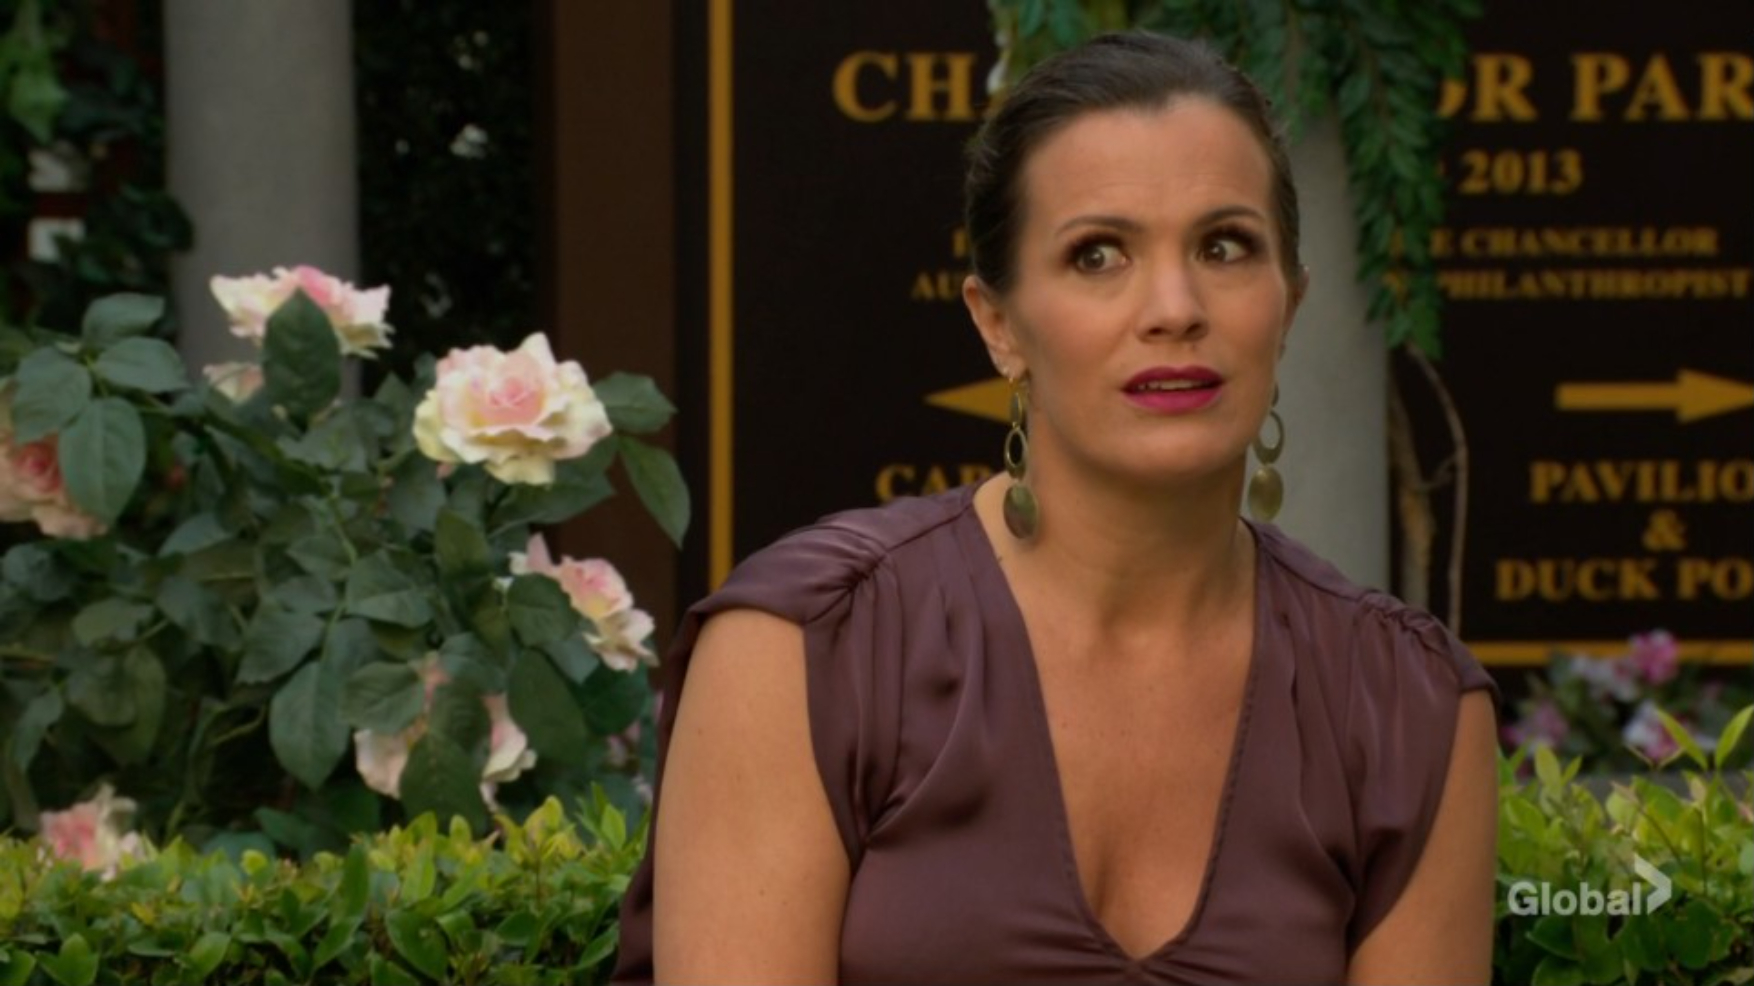 chelsea shocked ashland liar young restless